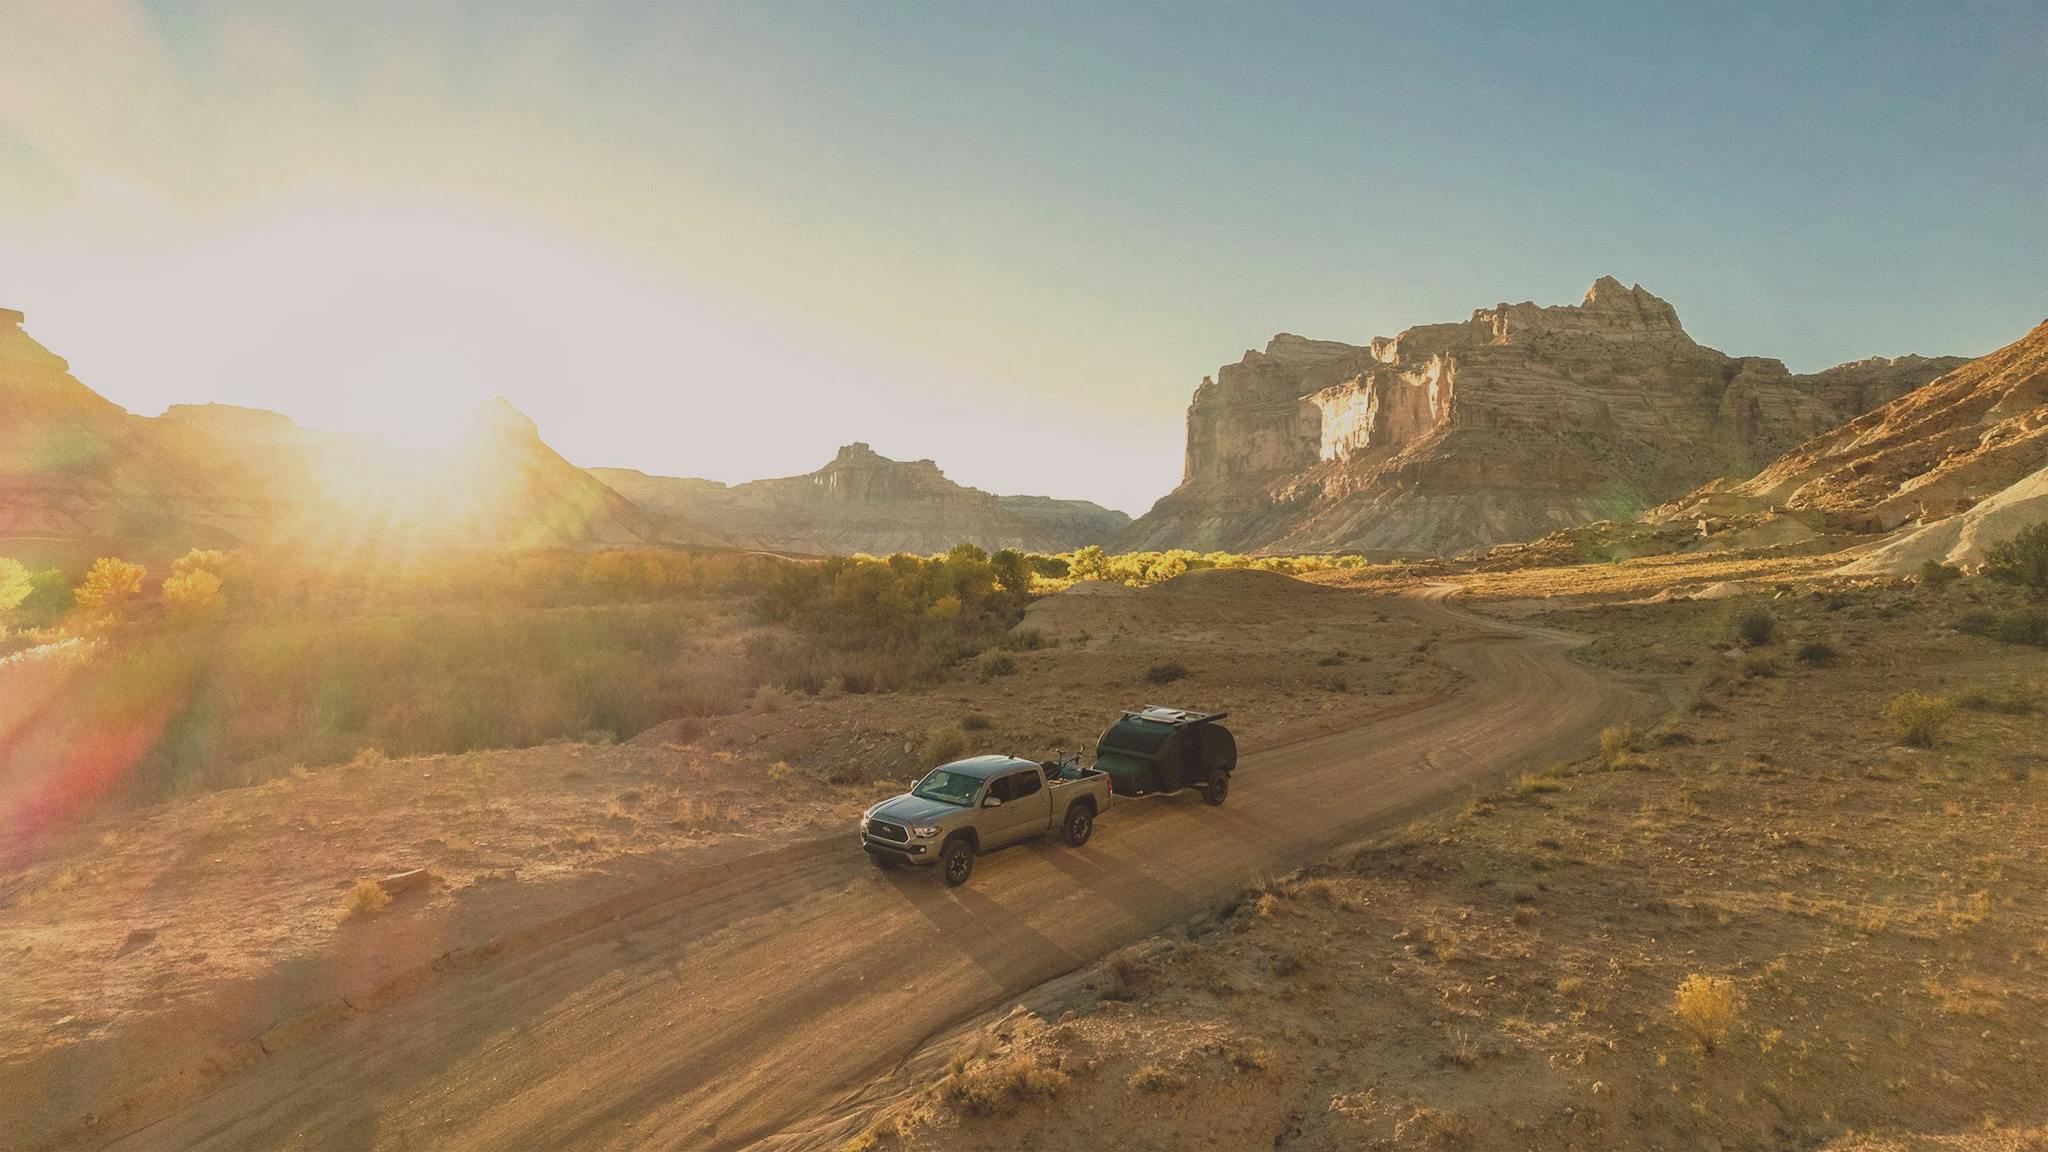 The TOPO2 Voyager being towed by a Toyota Tacoma in the San Rafael Swell.